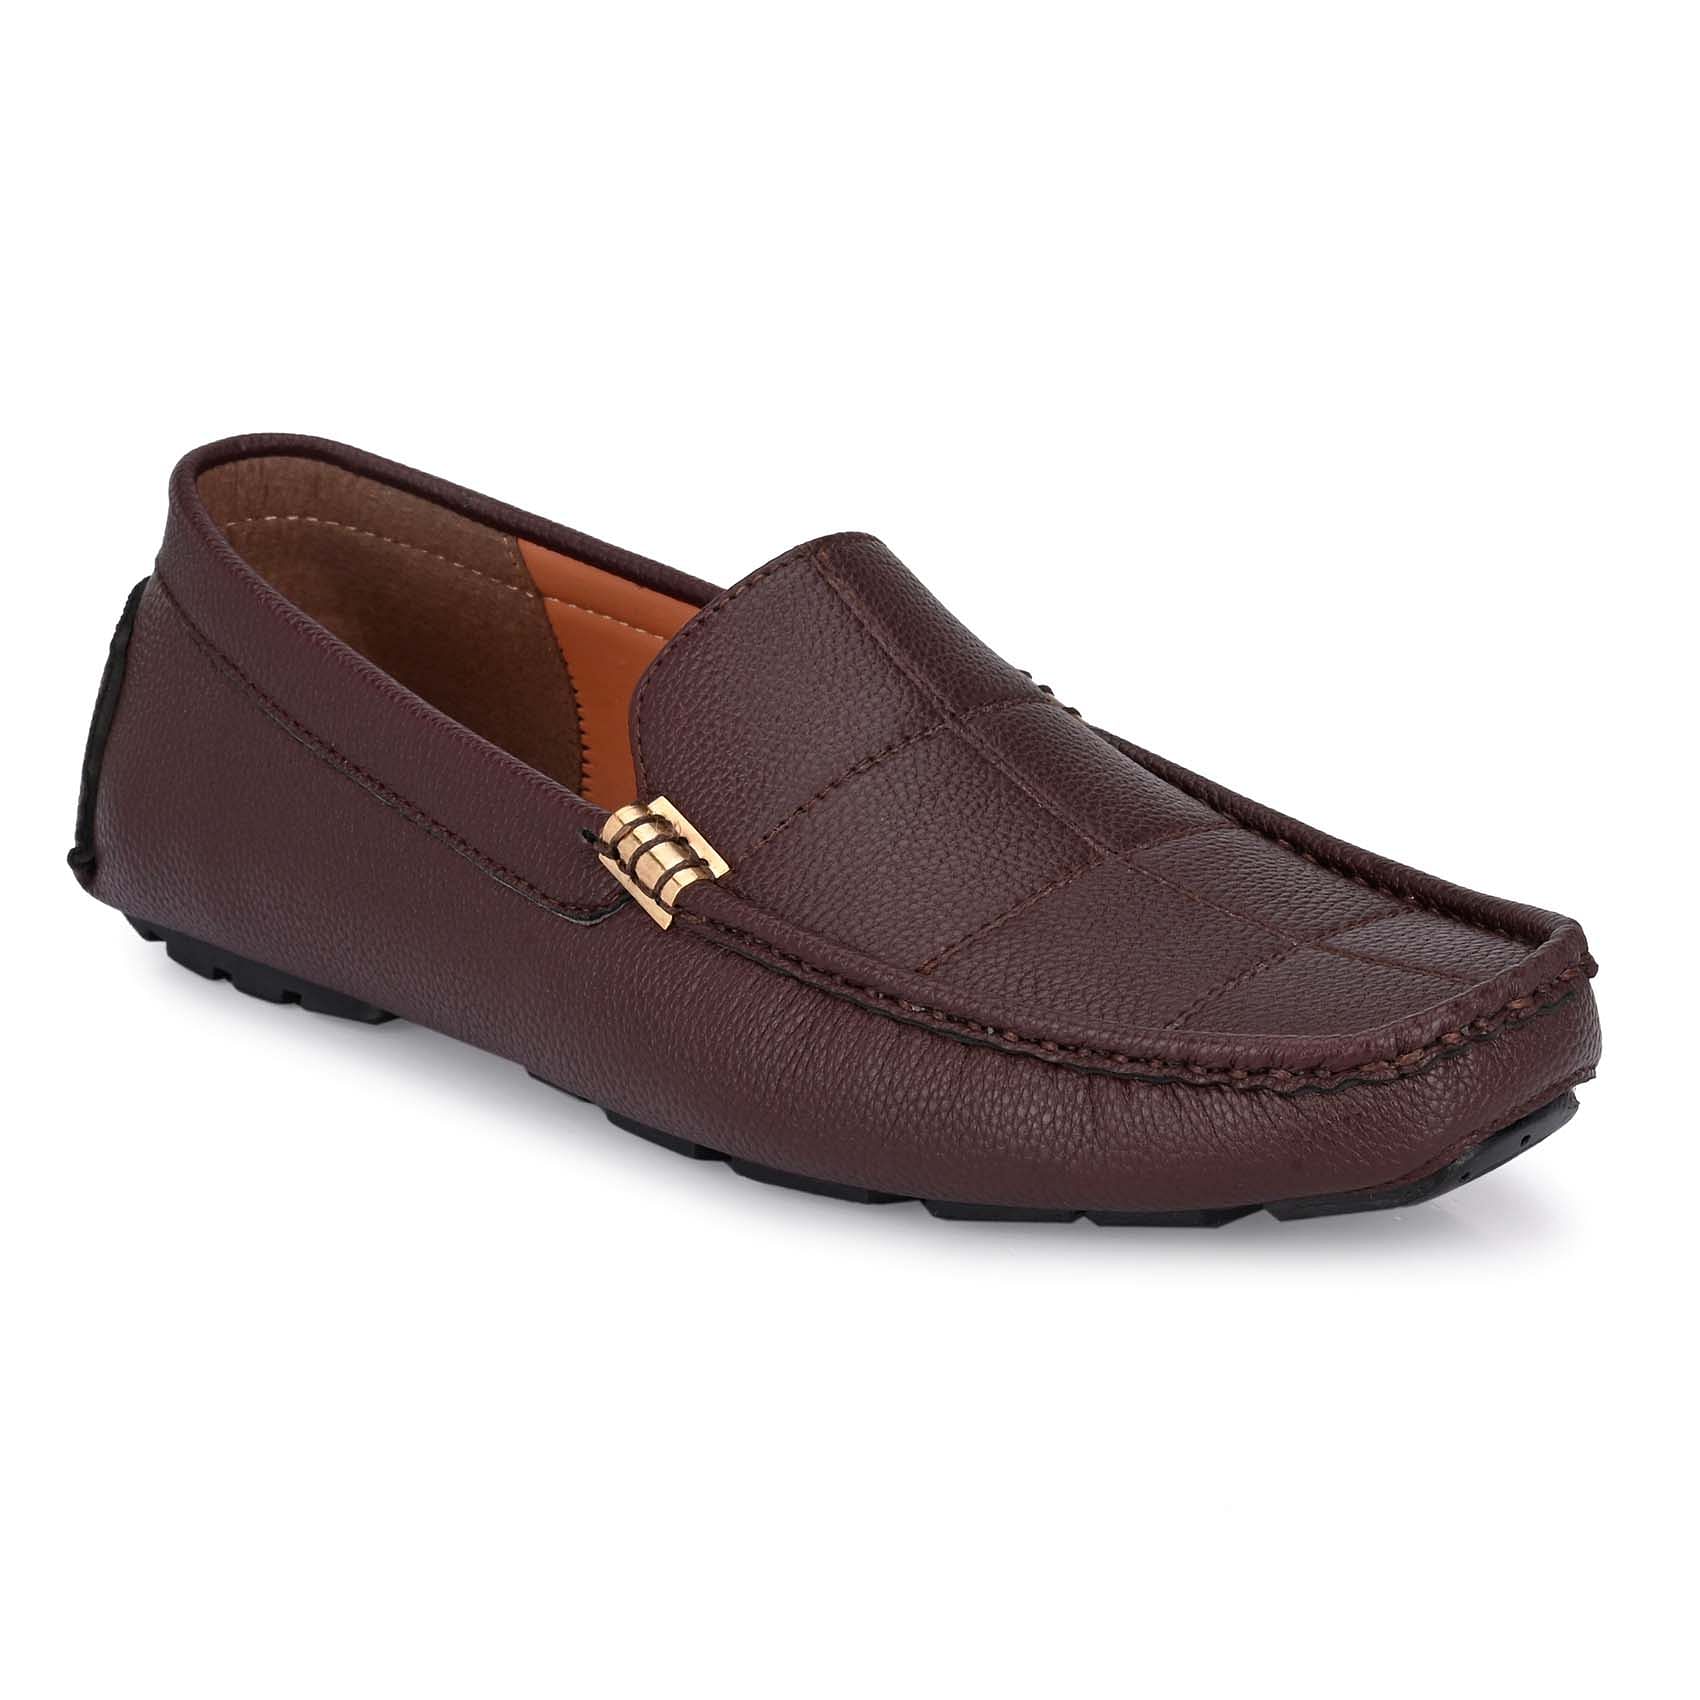 Pair-it Men's Loafers Shoes - Brown-LZ-Loafer112